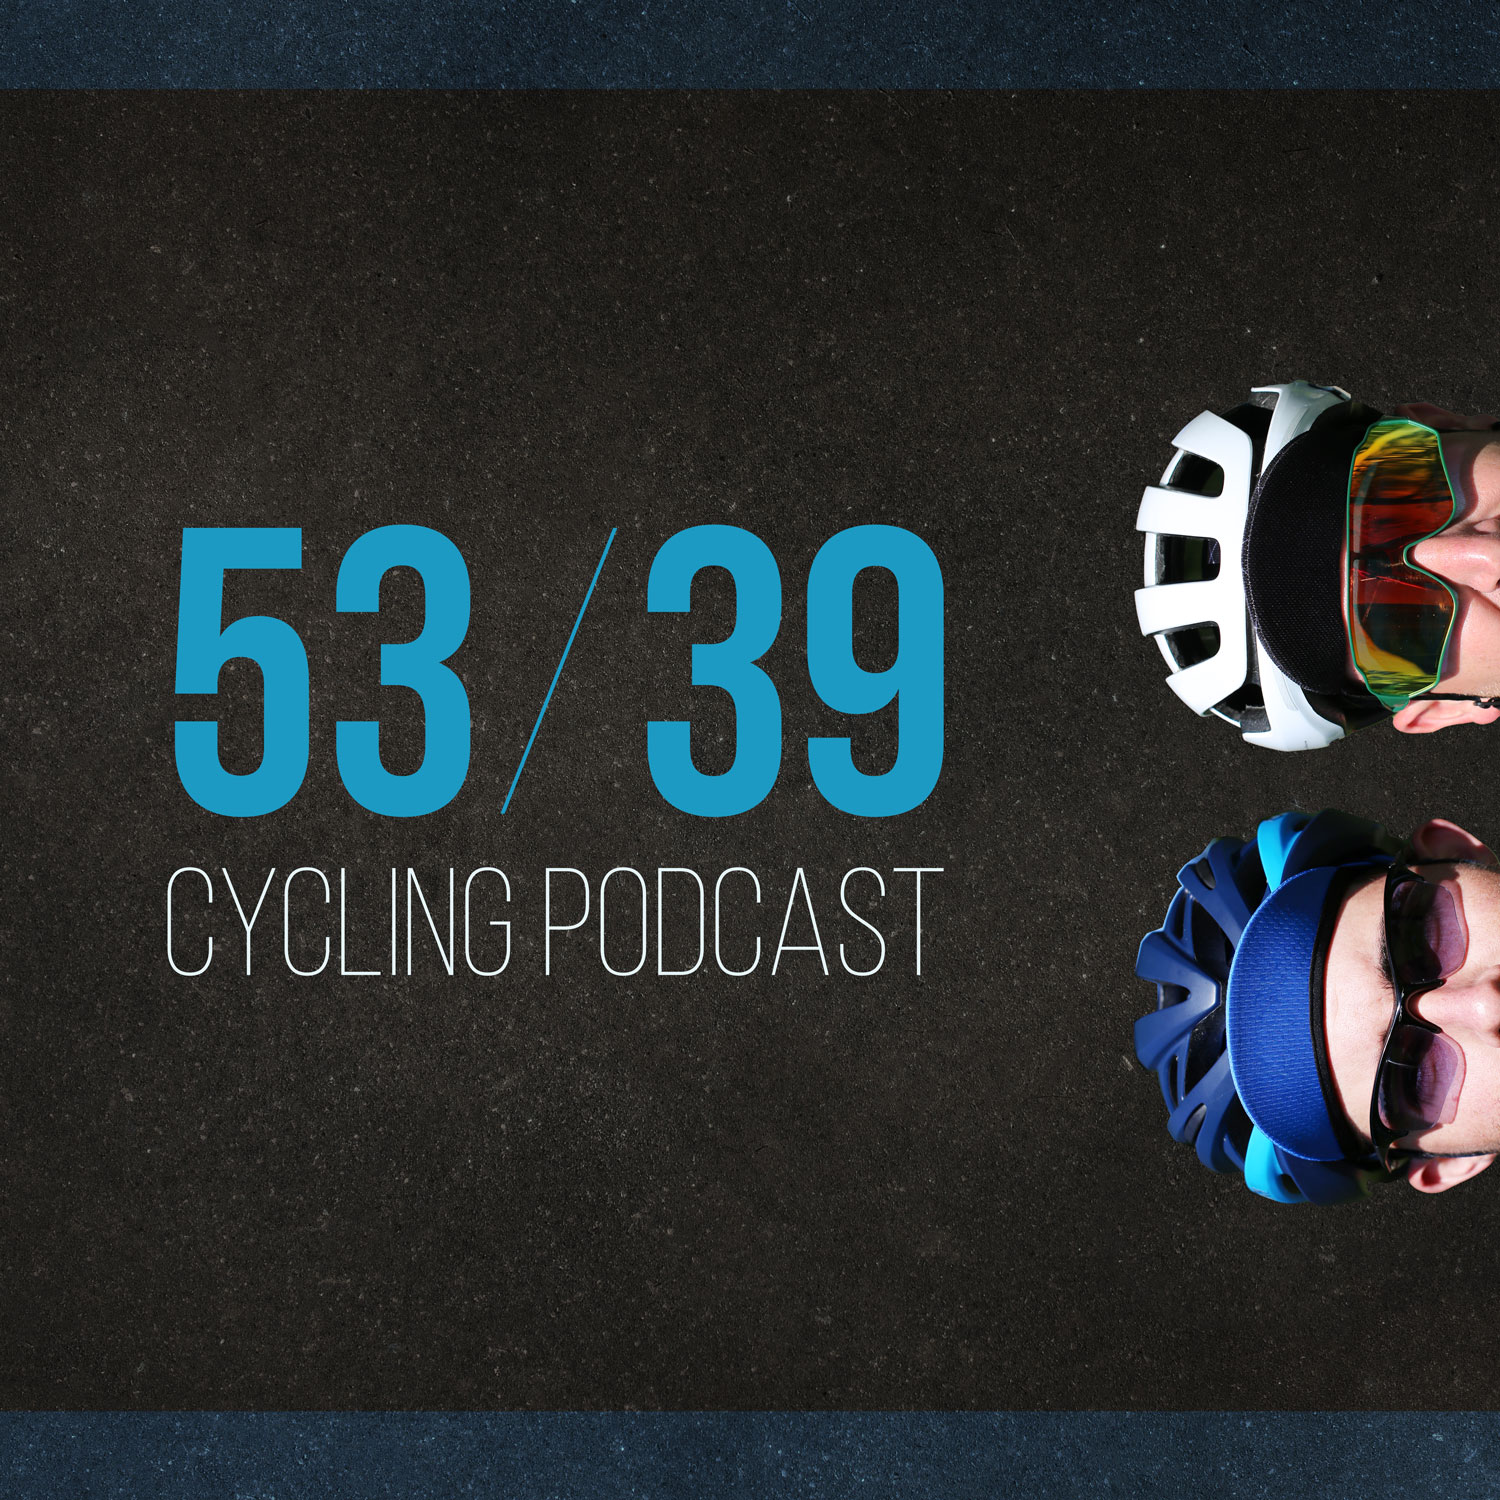 53/39 Cycling Podcast